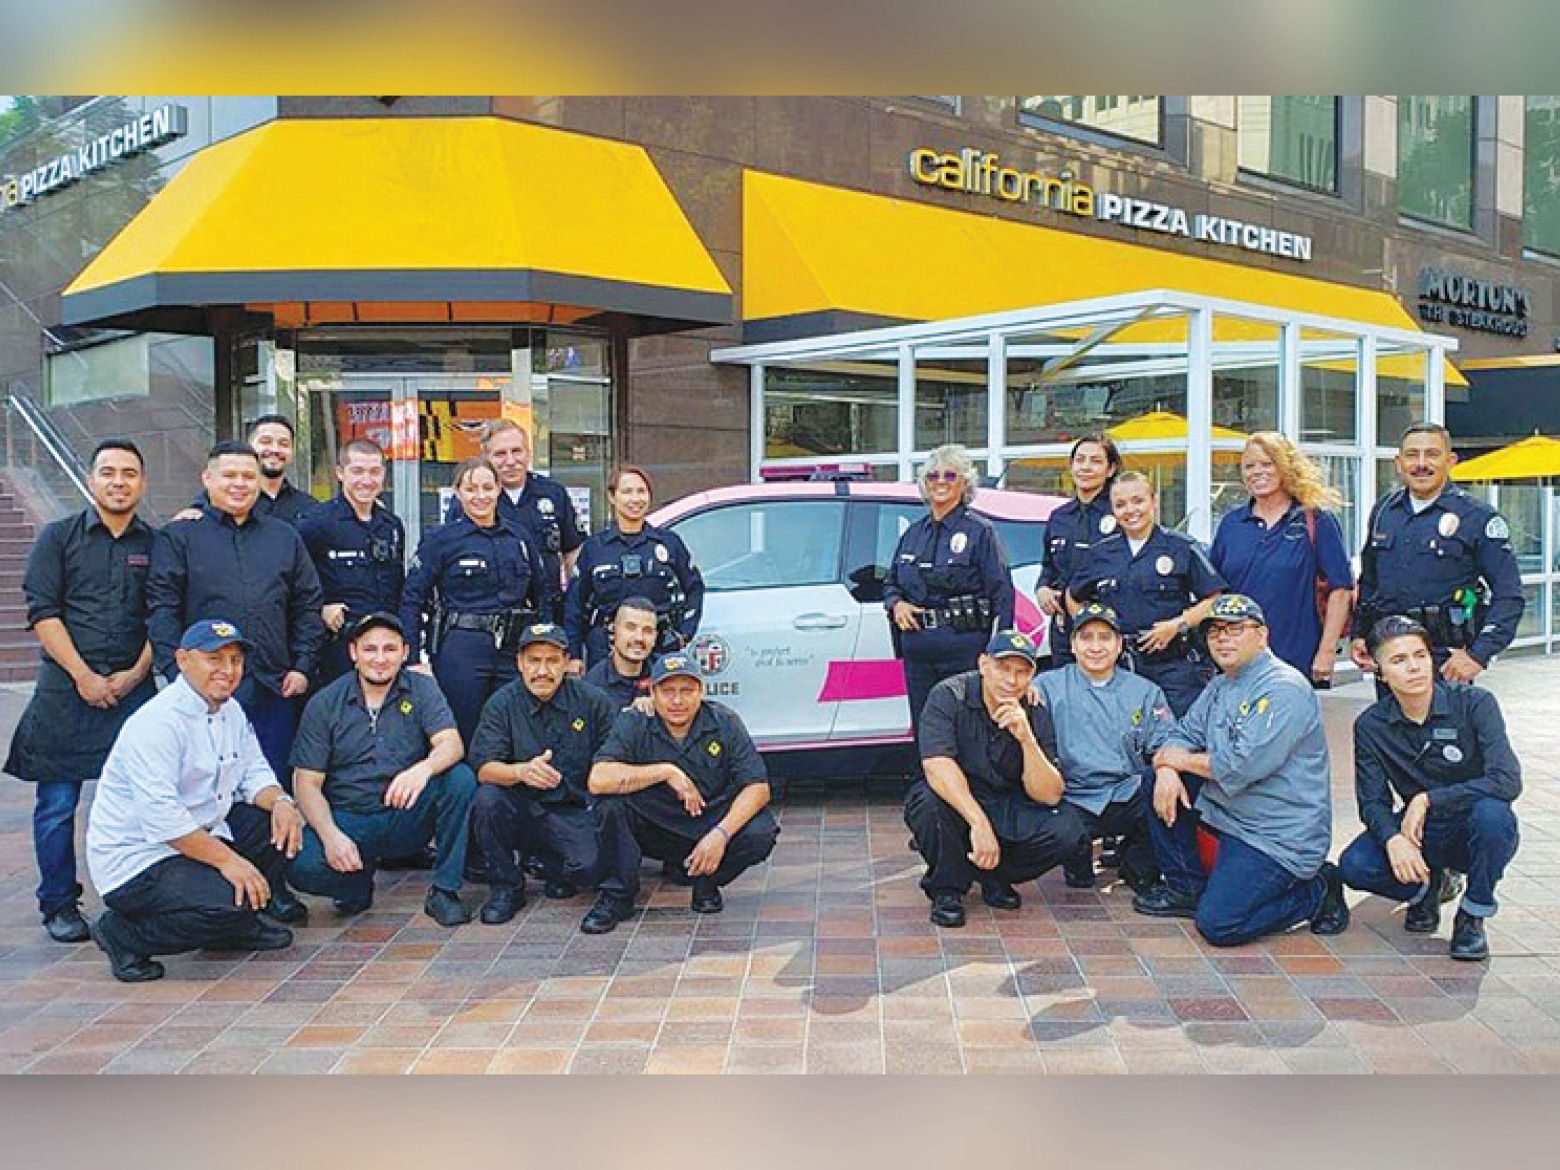 breast-cancer-awareness-1-tip-a-cop-california-pizza-kitchen-figat7th-shopping-mall-city-of-hope-pink-patch